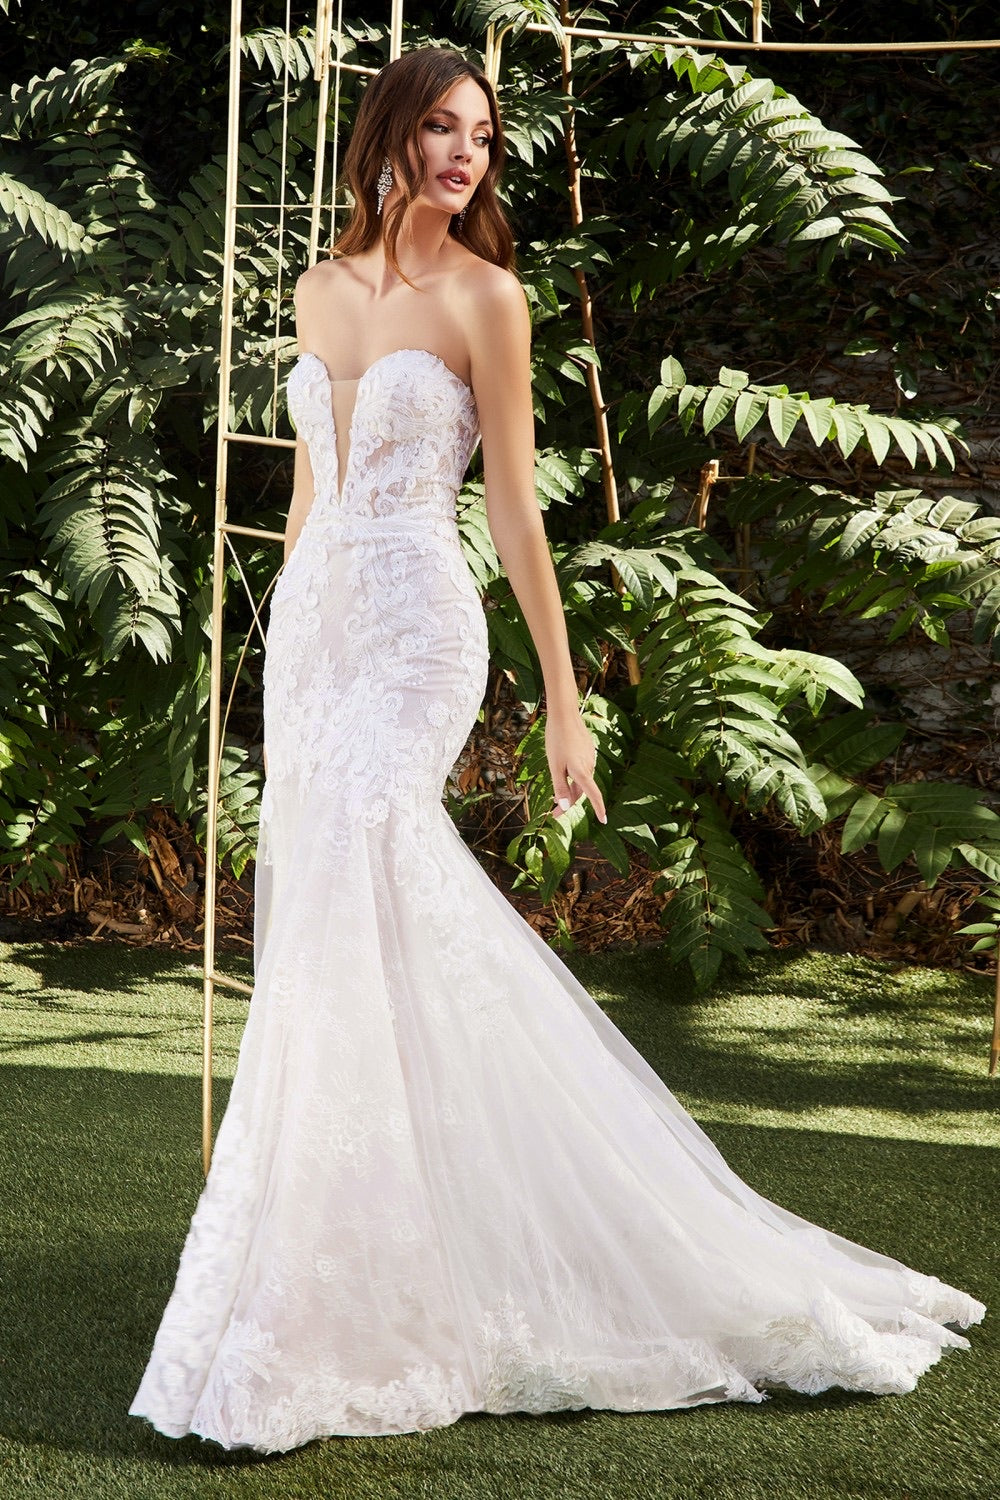 22 Wedding Dresses for Big Busts - hitched.co.uk